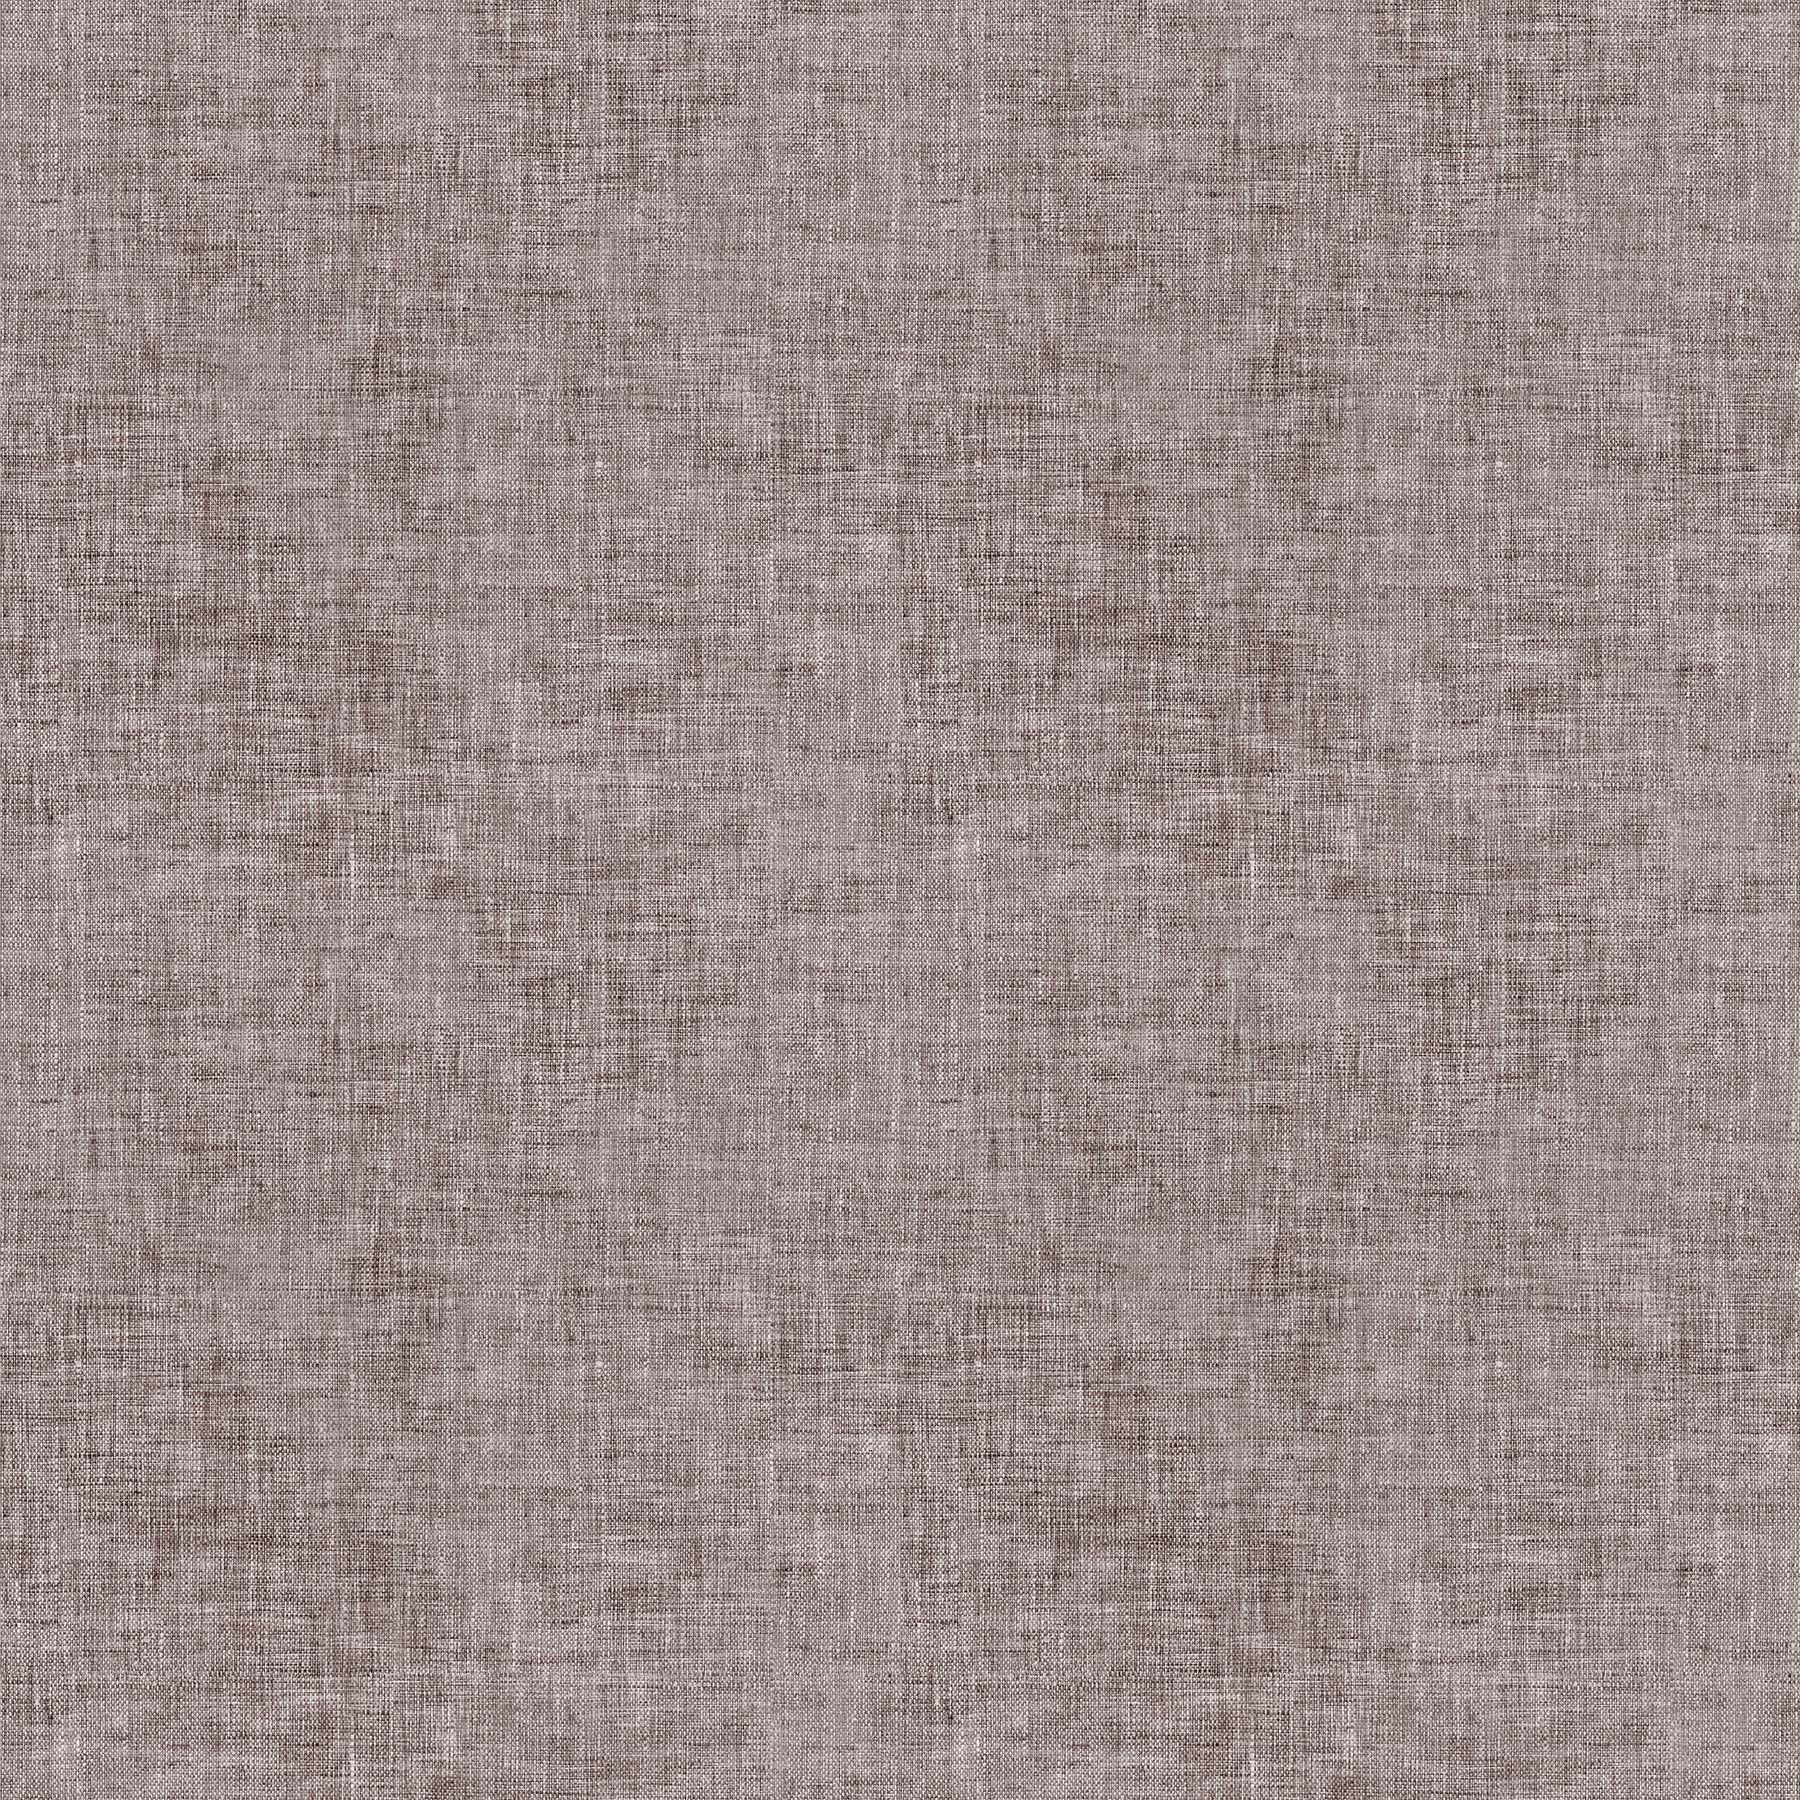 LINEN LOOK WEAVE - TAUPE  FOREST FABLE FIGO FABRICS